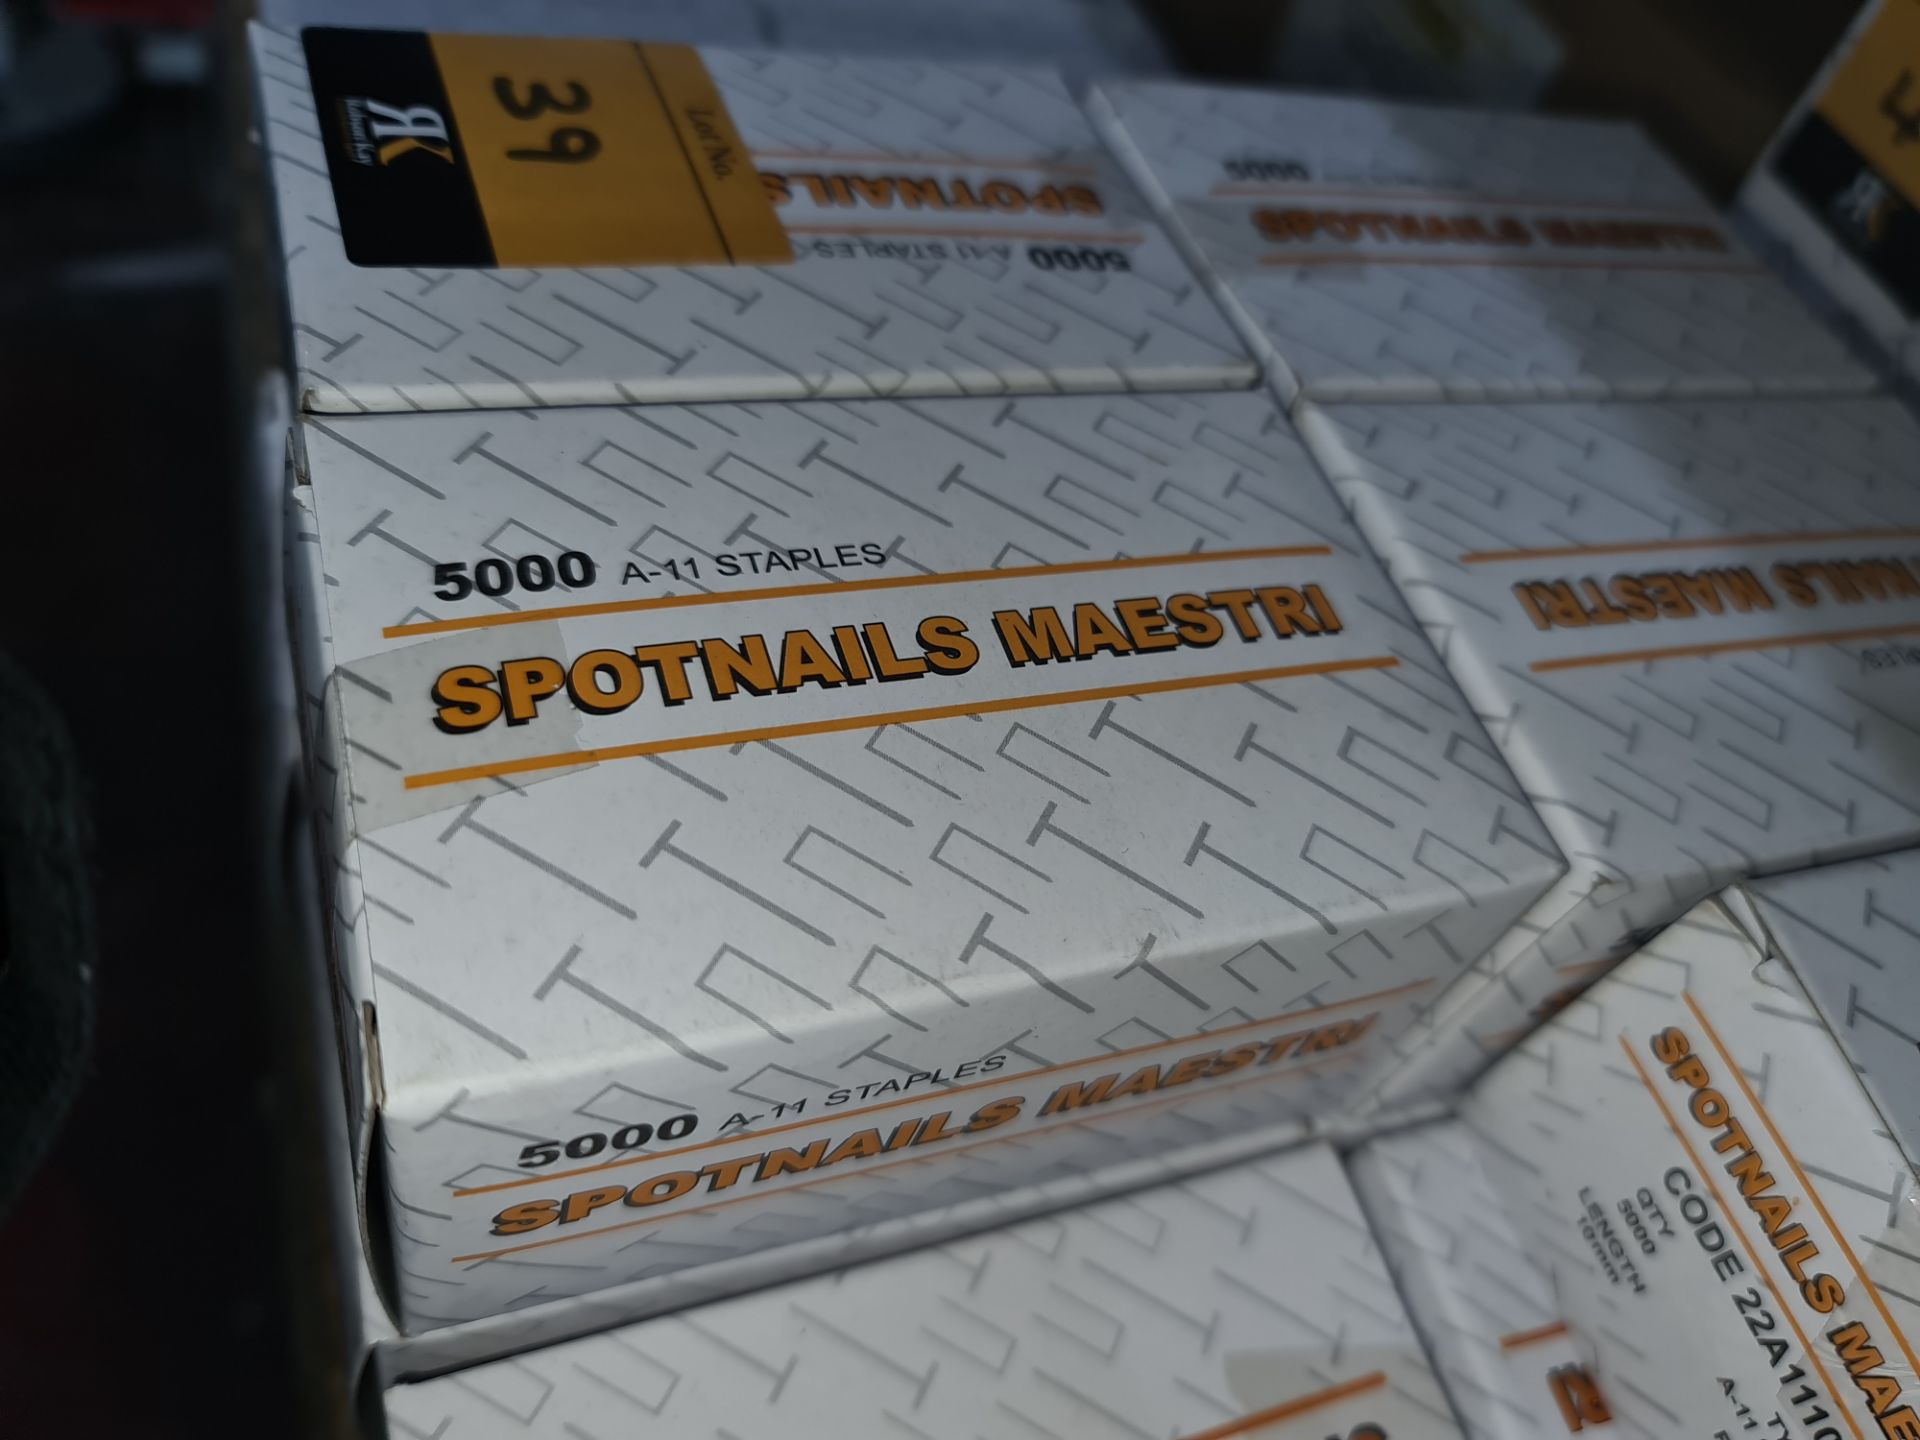 17 boxes of Maestri Spotnails, each box containing 5,000 type A-11.C 10mm staples. Product code - Image 2 of 3